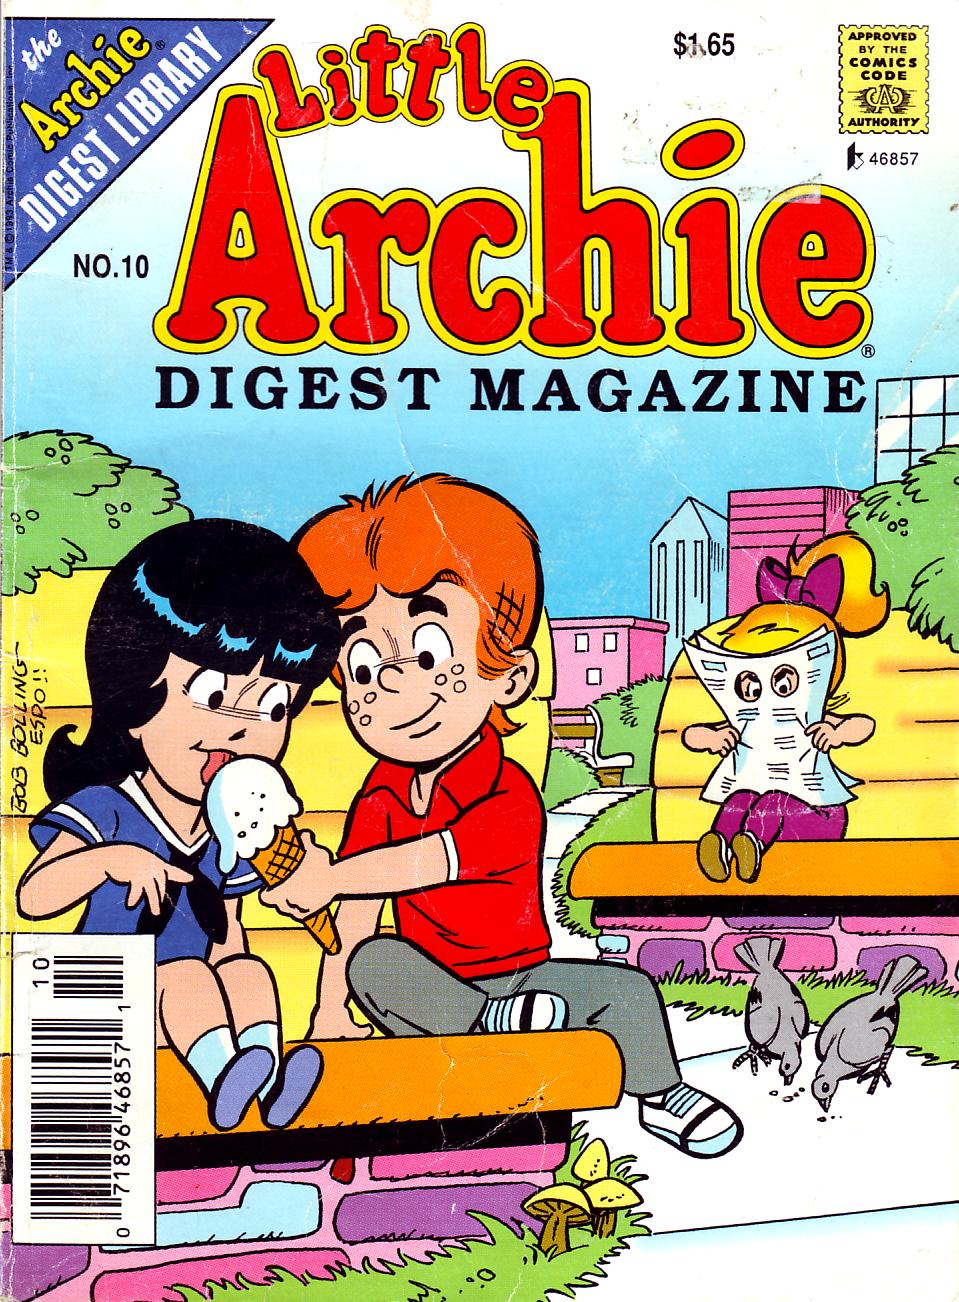 Little Archie Comics Digest Magazine Issue 10 | Read Little Archie Comics  Digest Magazine Issue 10 comic online in high quality. Read Full Comic  online for free - Read comics online in